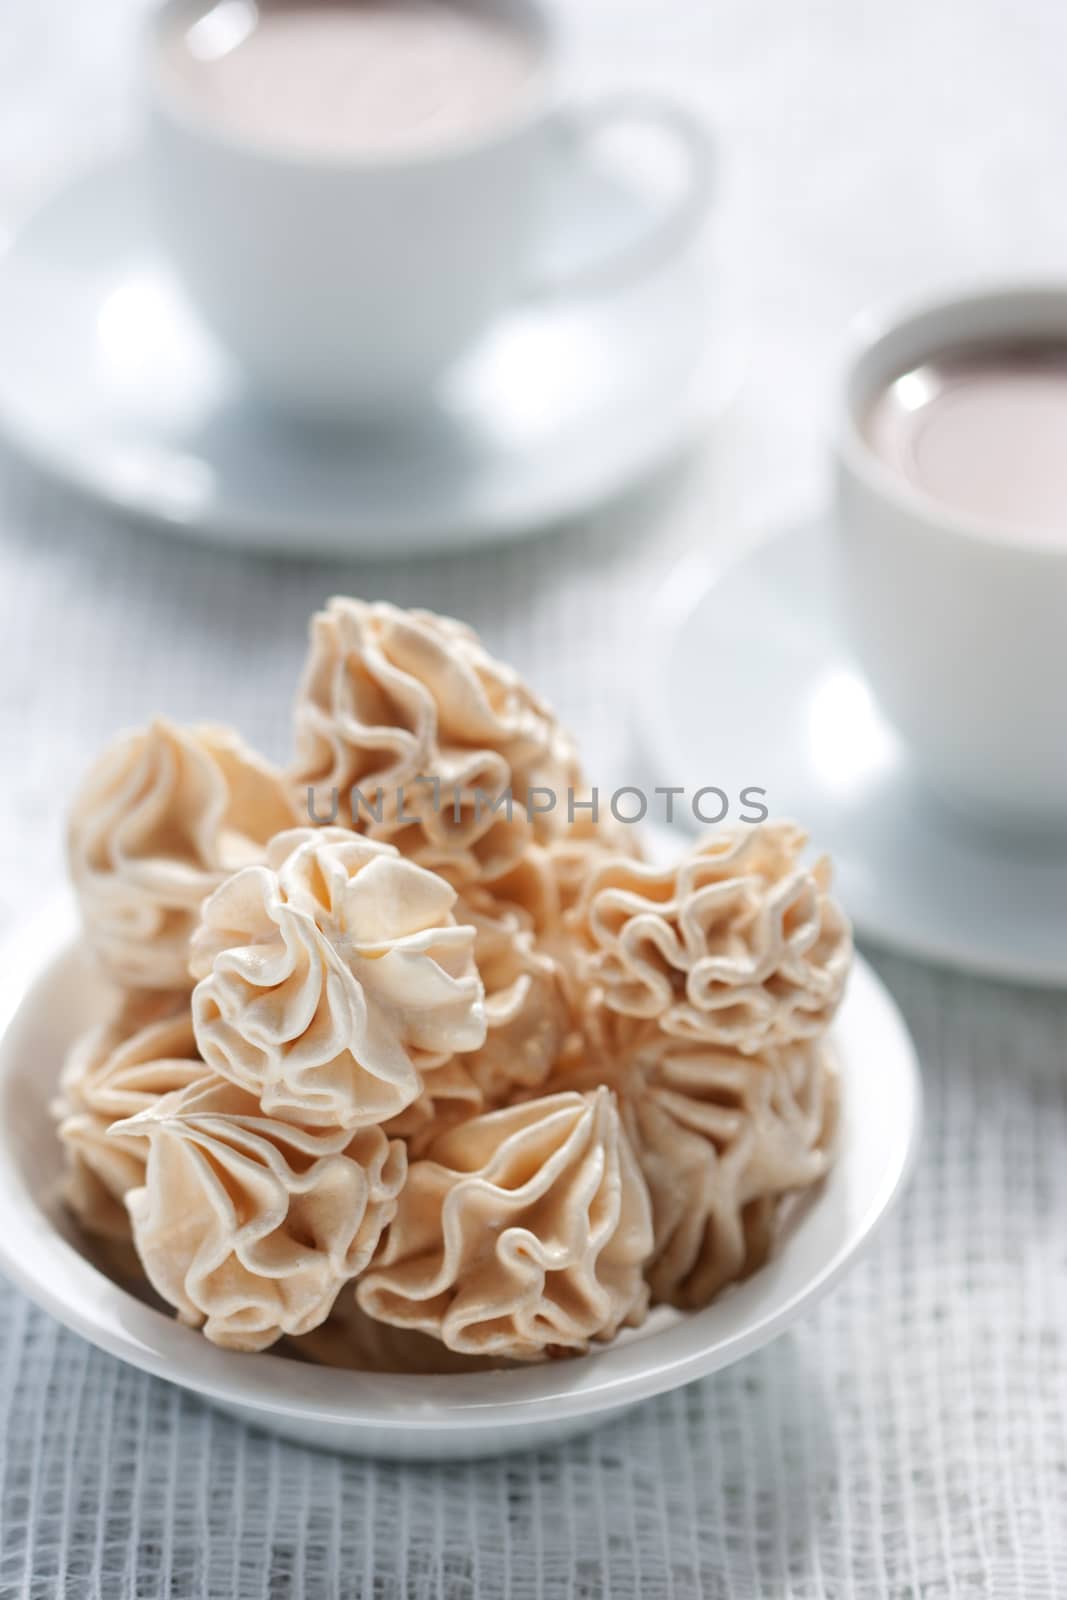 Meringues and two cups of chocolate drink, shallow dof.